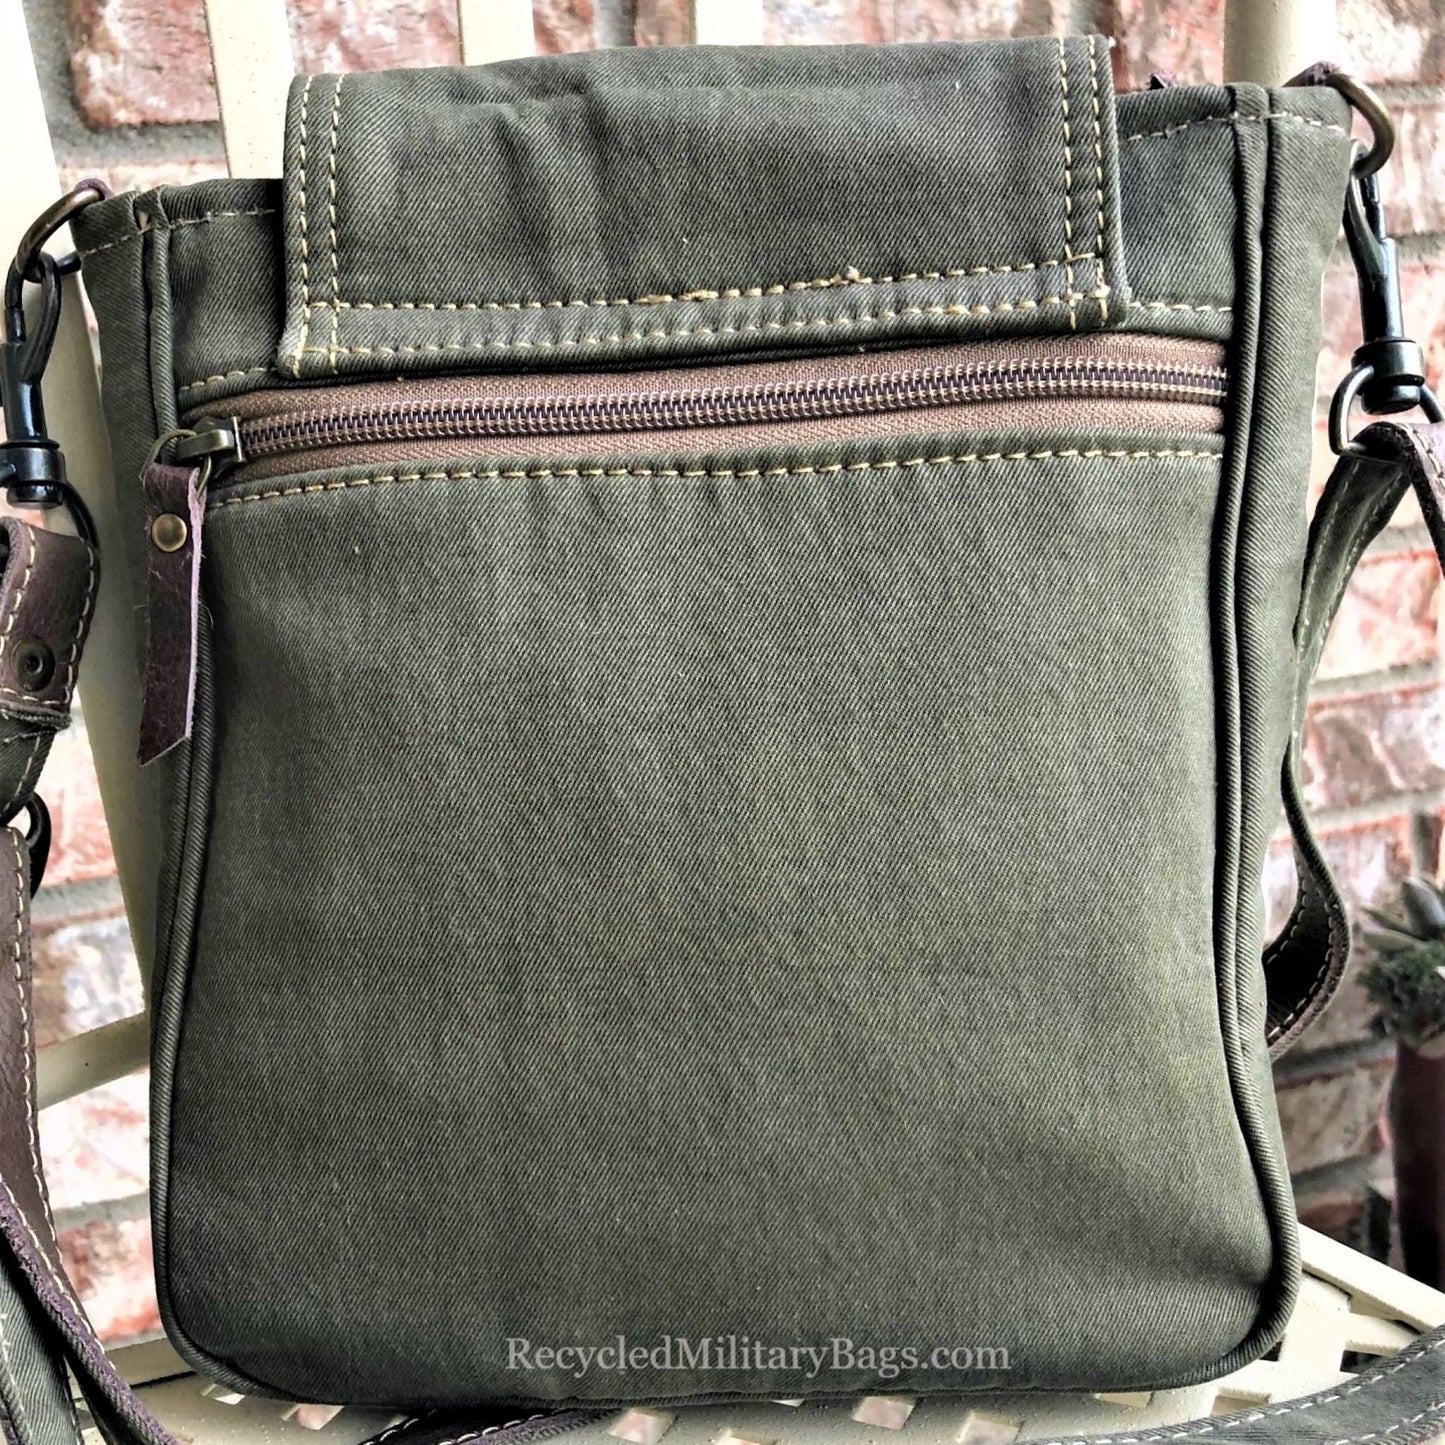 Small Green Crossbody Bag with Leather Star   ~  Great Small Travel Bag or Gift for Army Mom or Wife